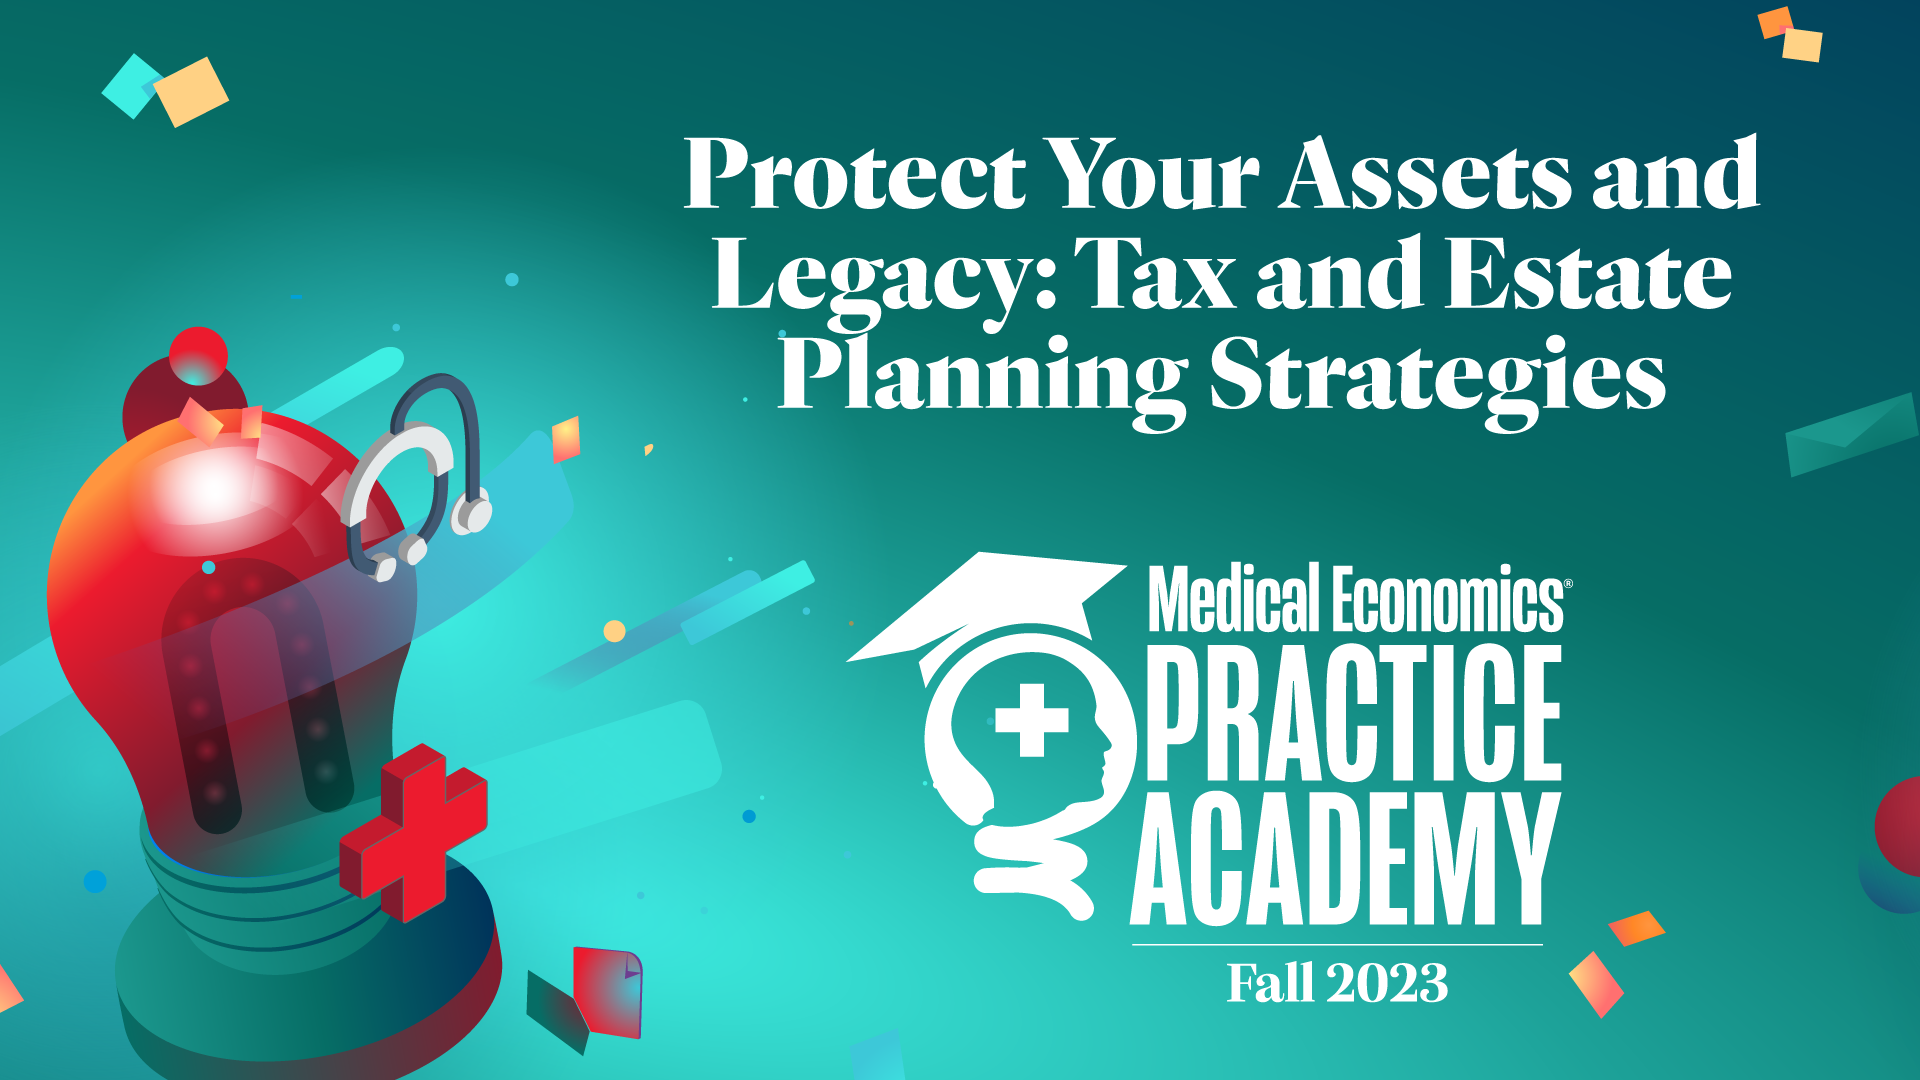 Protect Your Assets and Legacy: Tax and Estate Planning Strategies